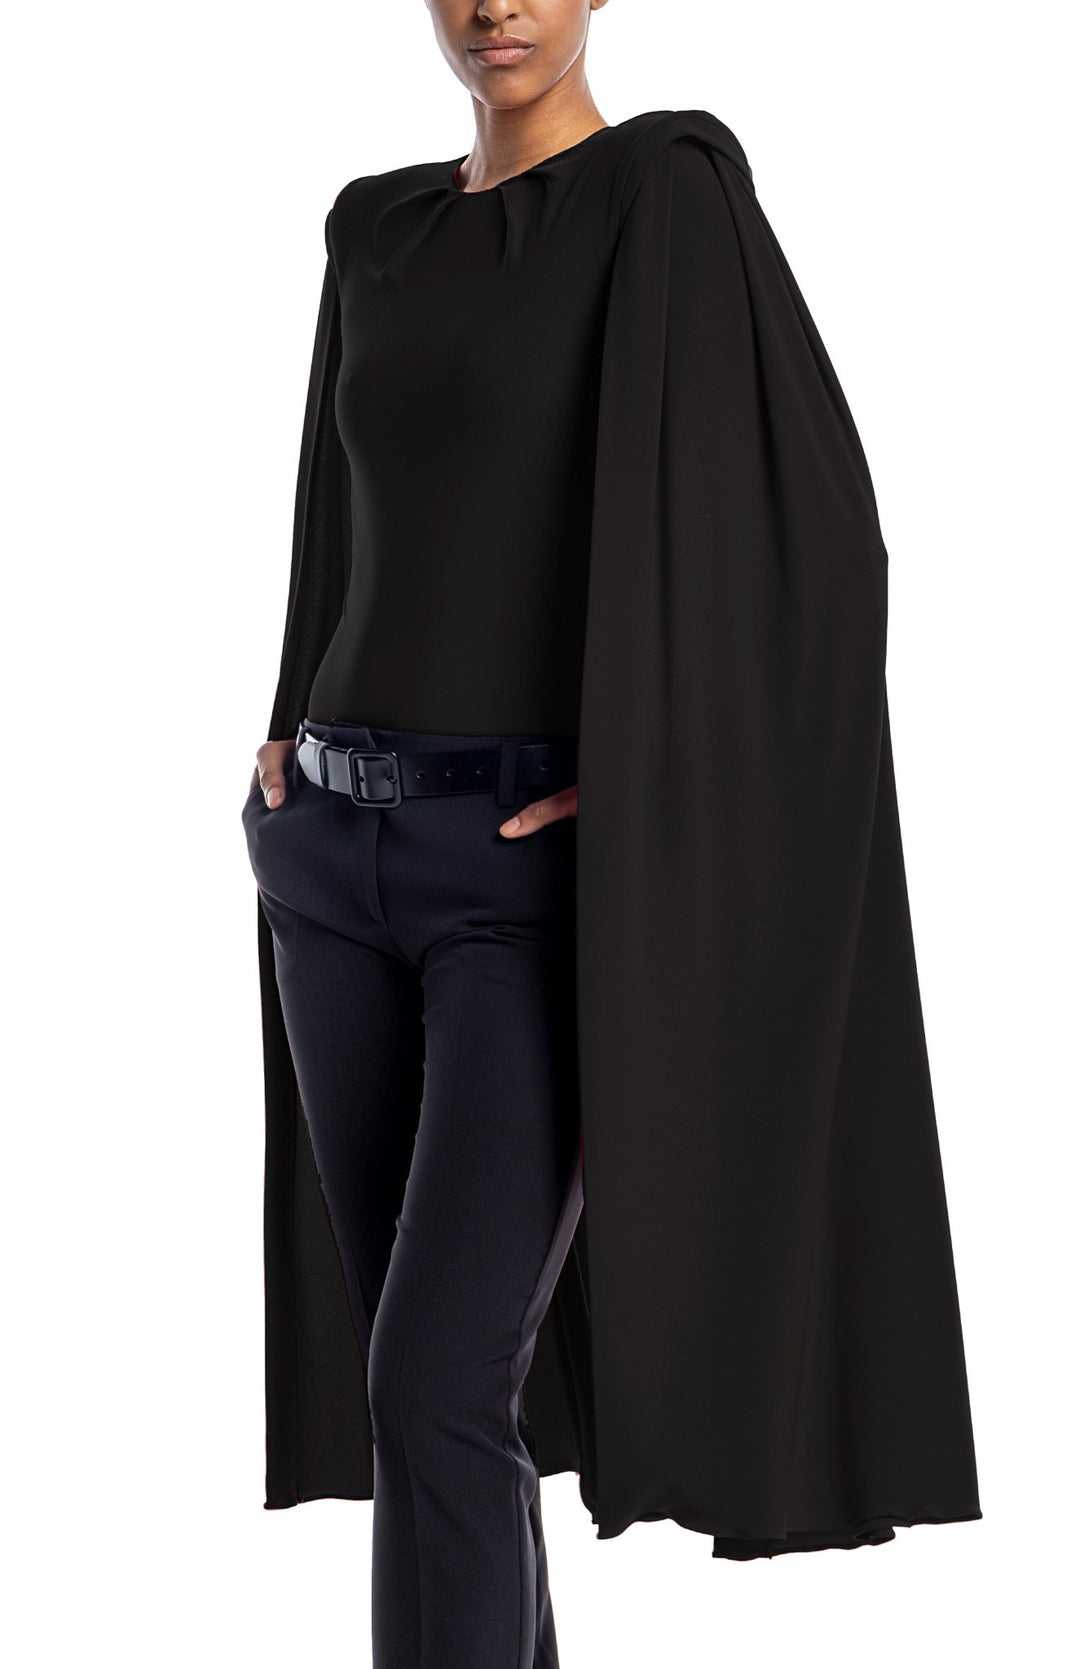 Chic, black, draped bodysuit with shoulder pads and oversized cape sleeves